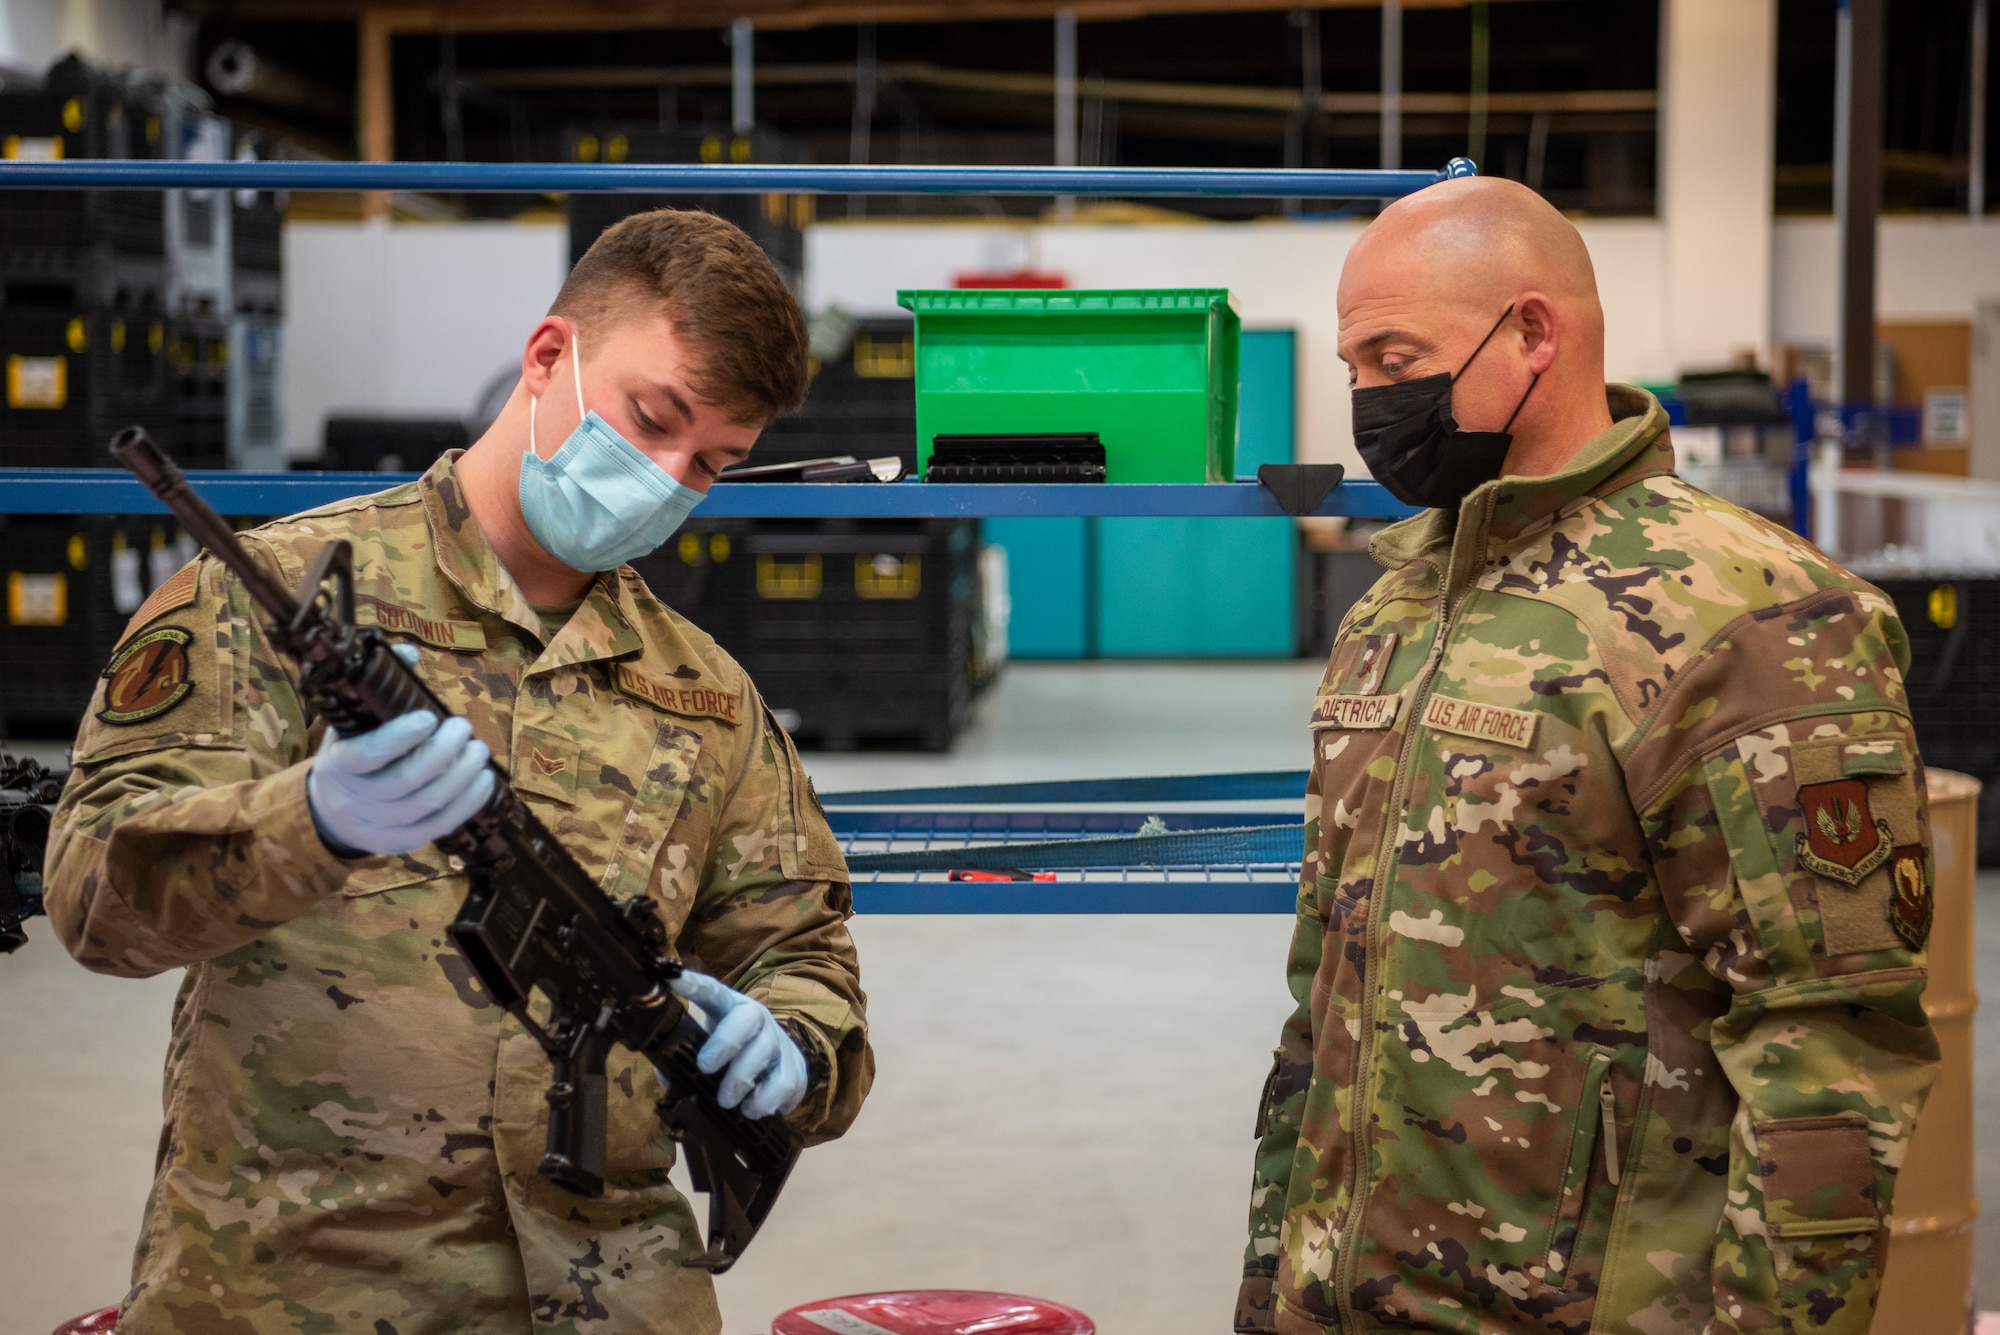 U.S. Air Force Airman 1st Class Gaige Goodwin, 52nd Logistic Readiness Squadron individual protective equipment journeyman, left, shows Brig. Gen. George T. Dietrich III, U.S. Air Forces in Europe - Air Forces Africa director of logistics, engineering and force protection, the most common inspection failure points on the M16 rifle, Jan. 25, 2022, at Spangdahlem Air Base, Germany.